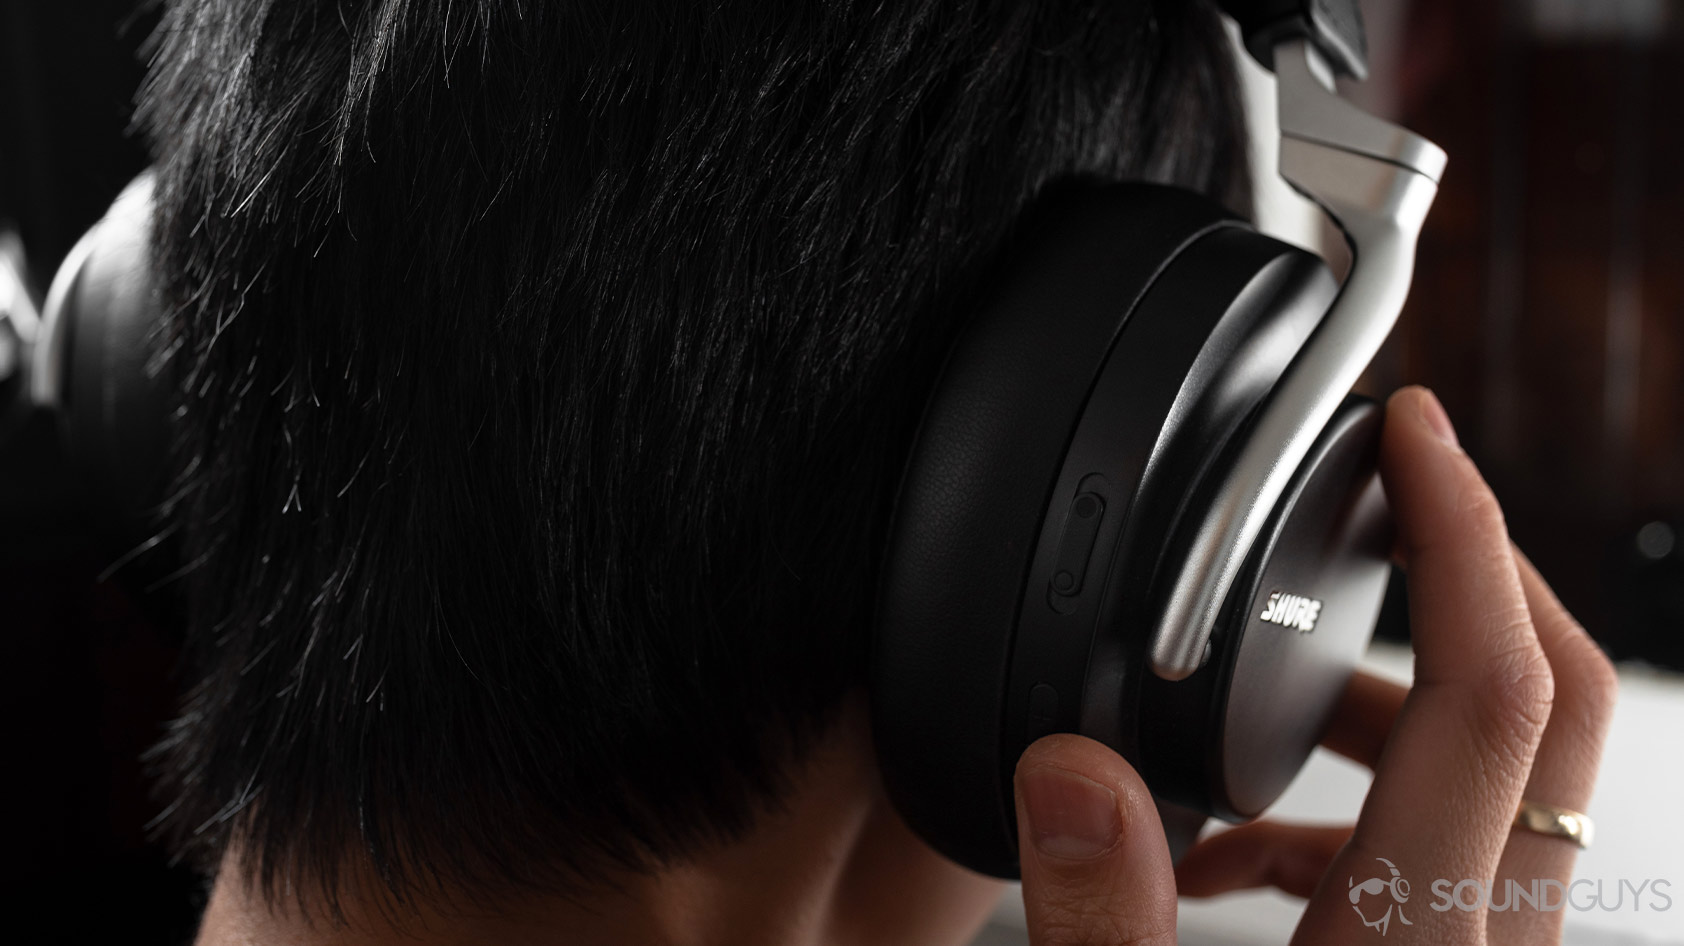 The Shure AONIC 50 noise canceling headphones' onboard controls used by a woman wearing the headset.